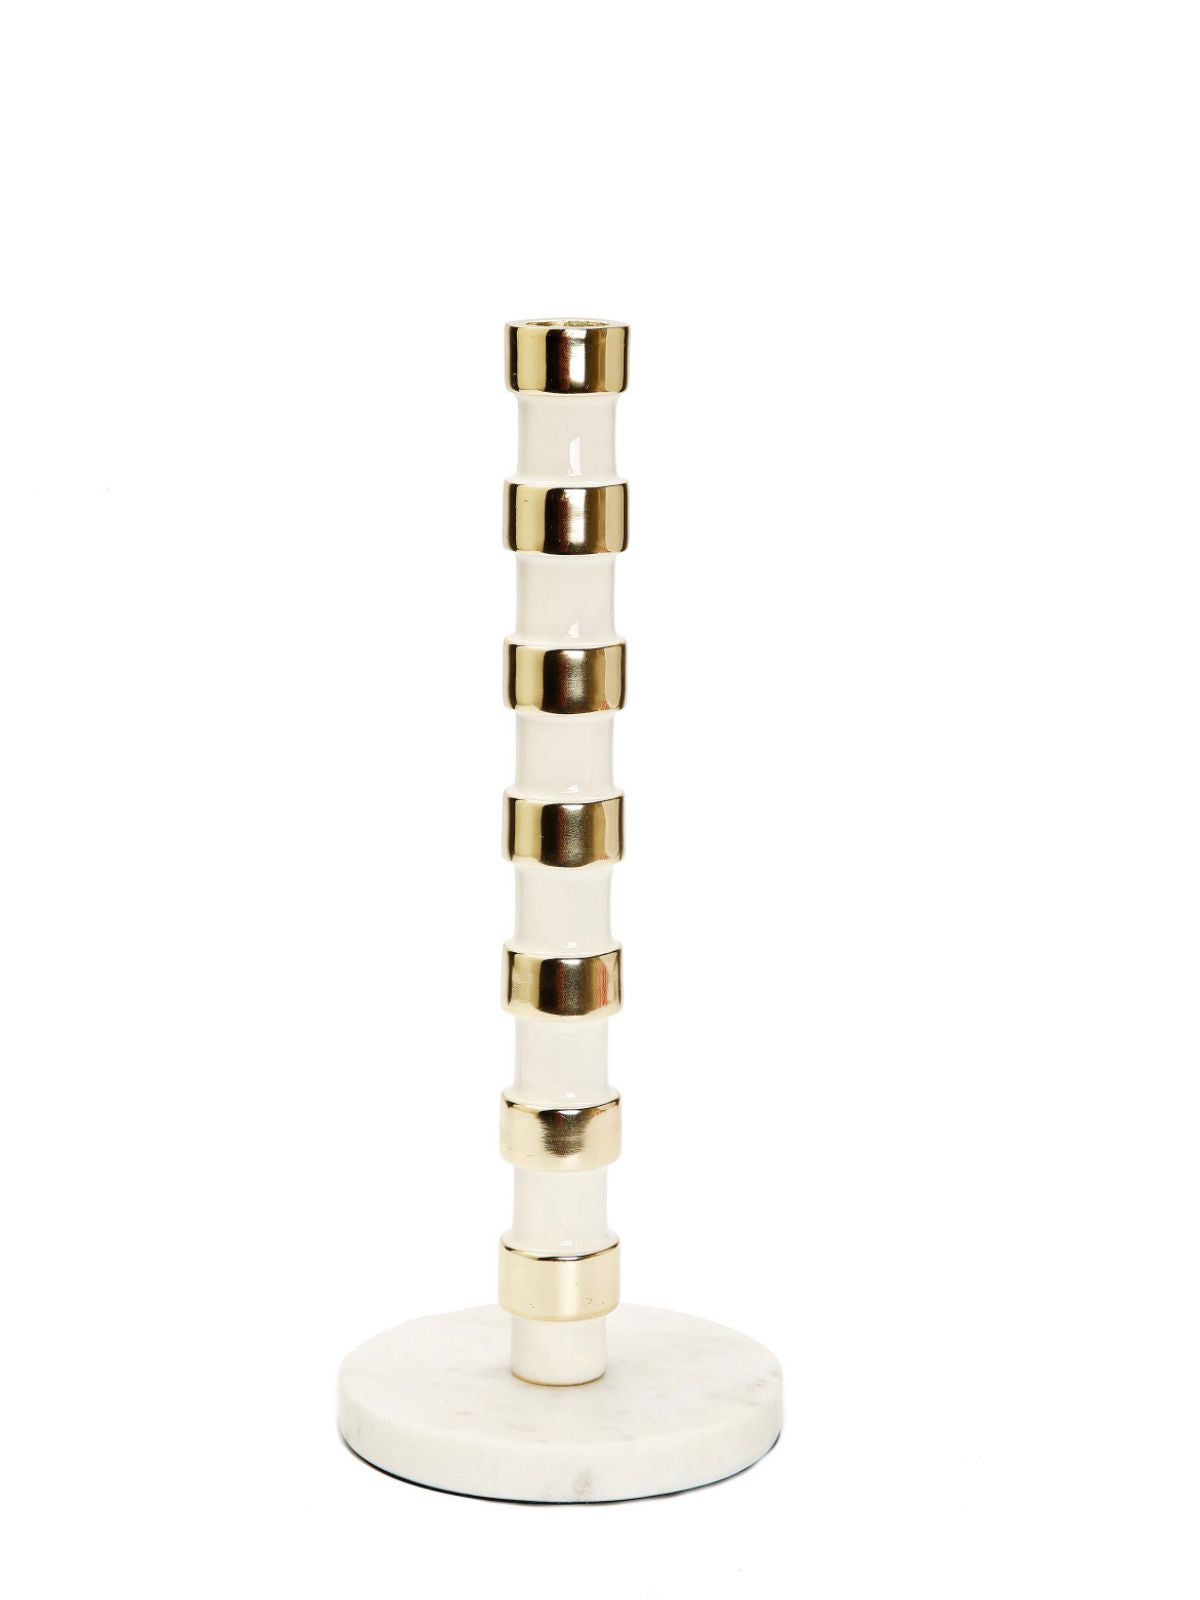 12 inch Tall Candle Holder on Marble Base with White and Gold Striped Design Around The Stem. 